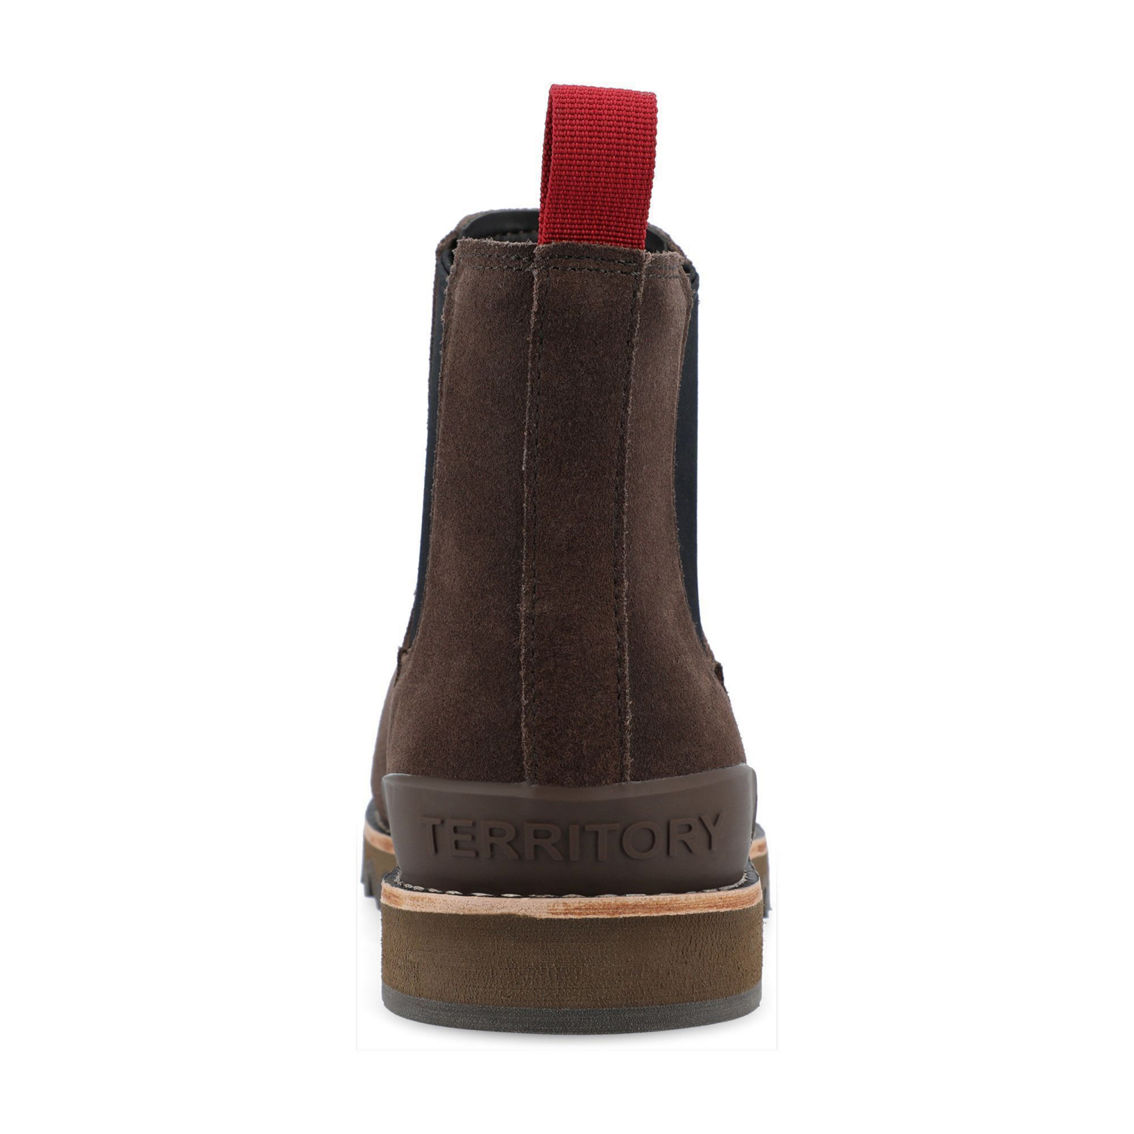 Territory Yellowstone Water Resistant Chelsea Boot - Image 3 of 5